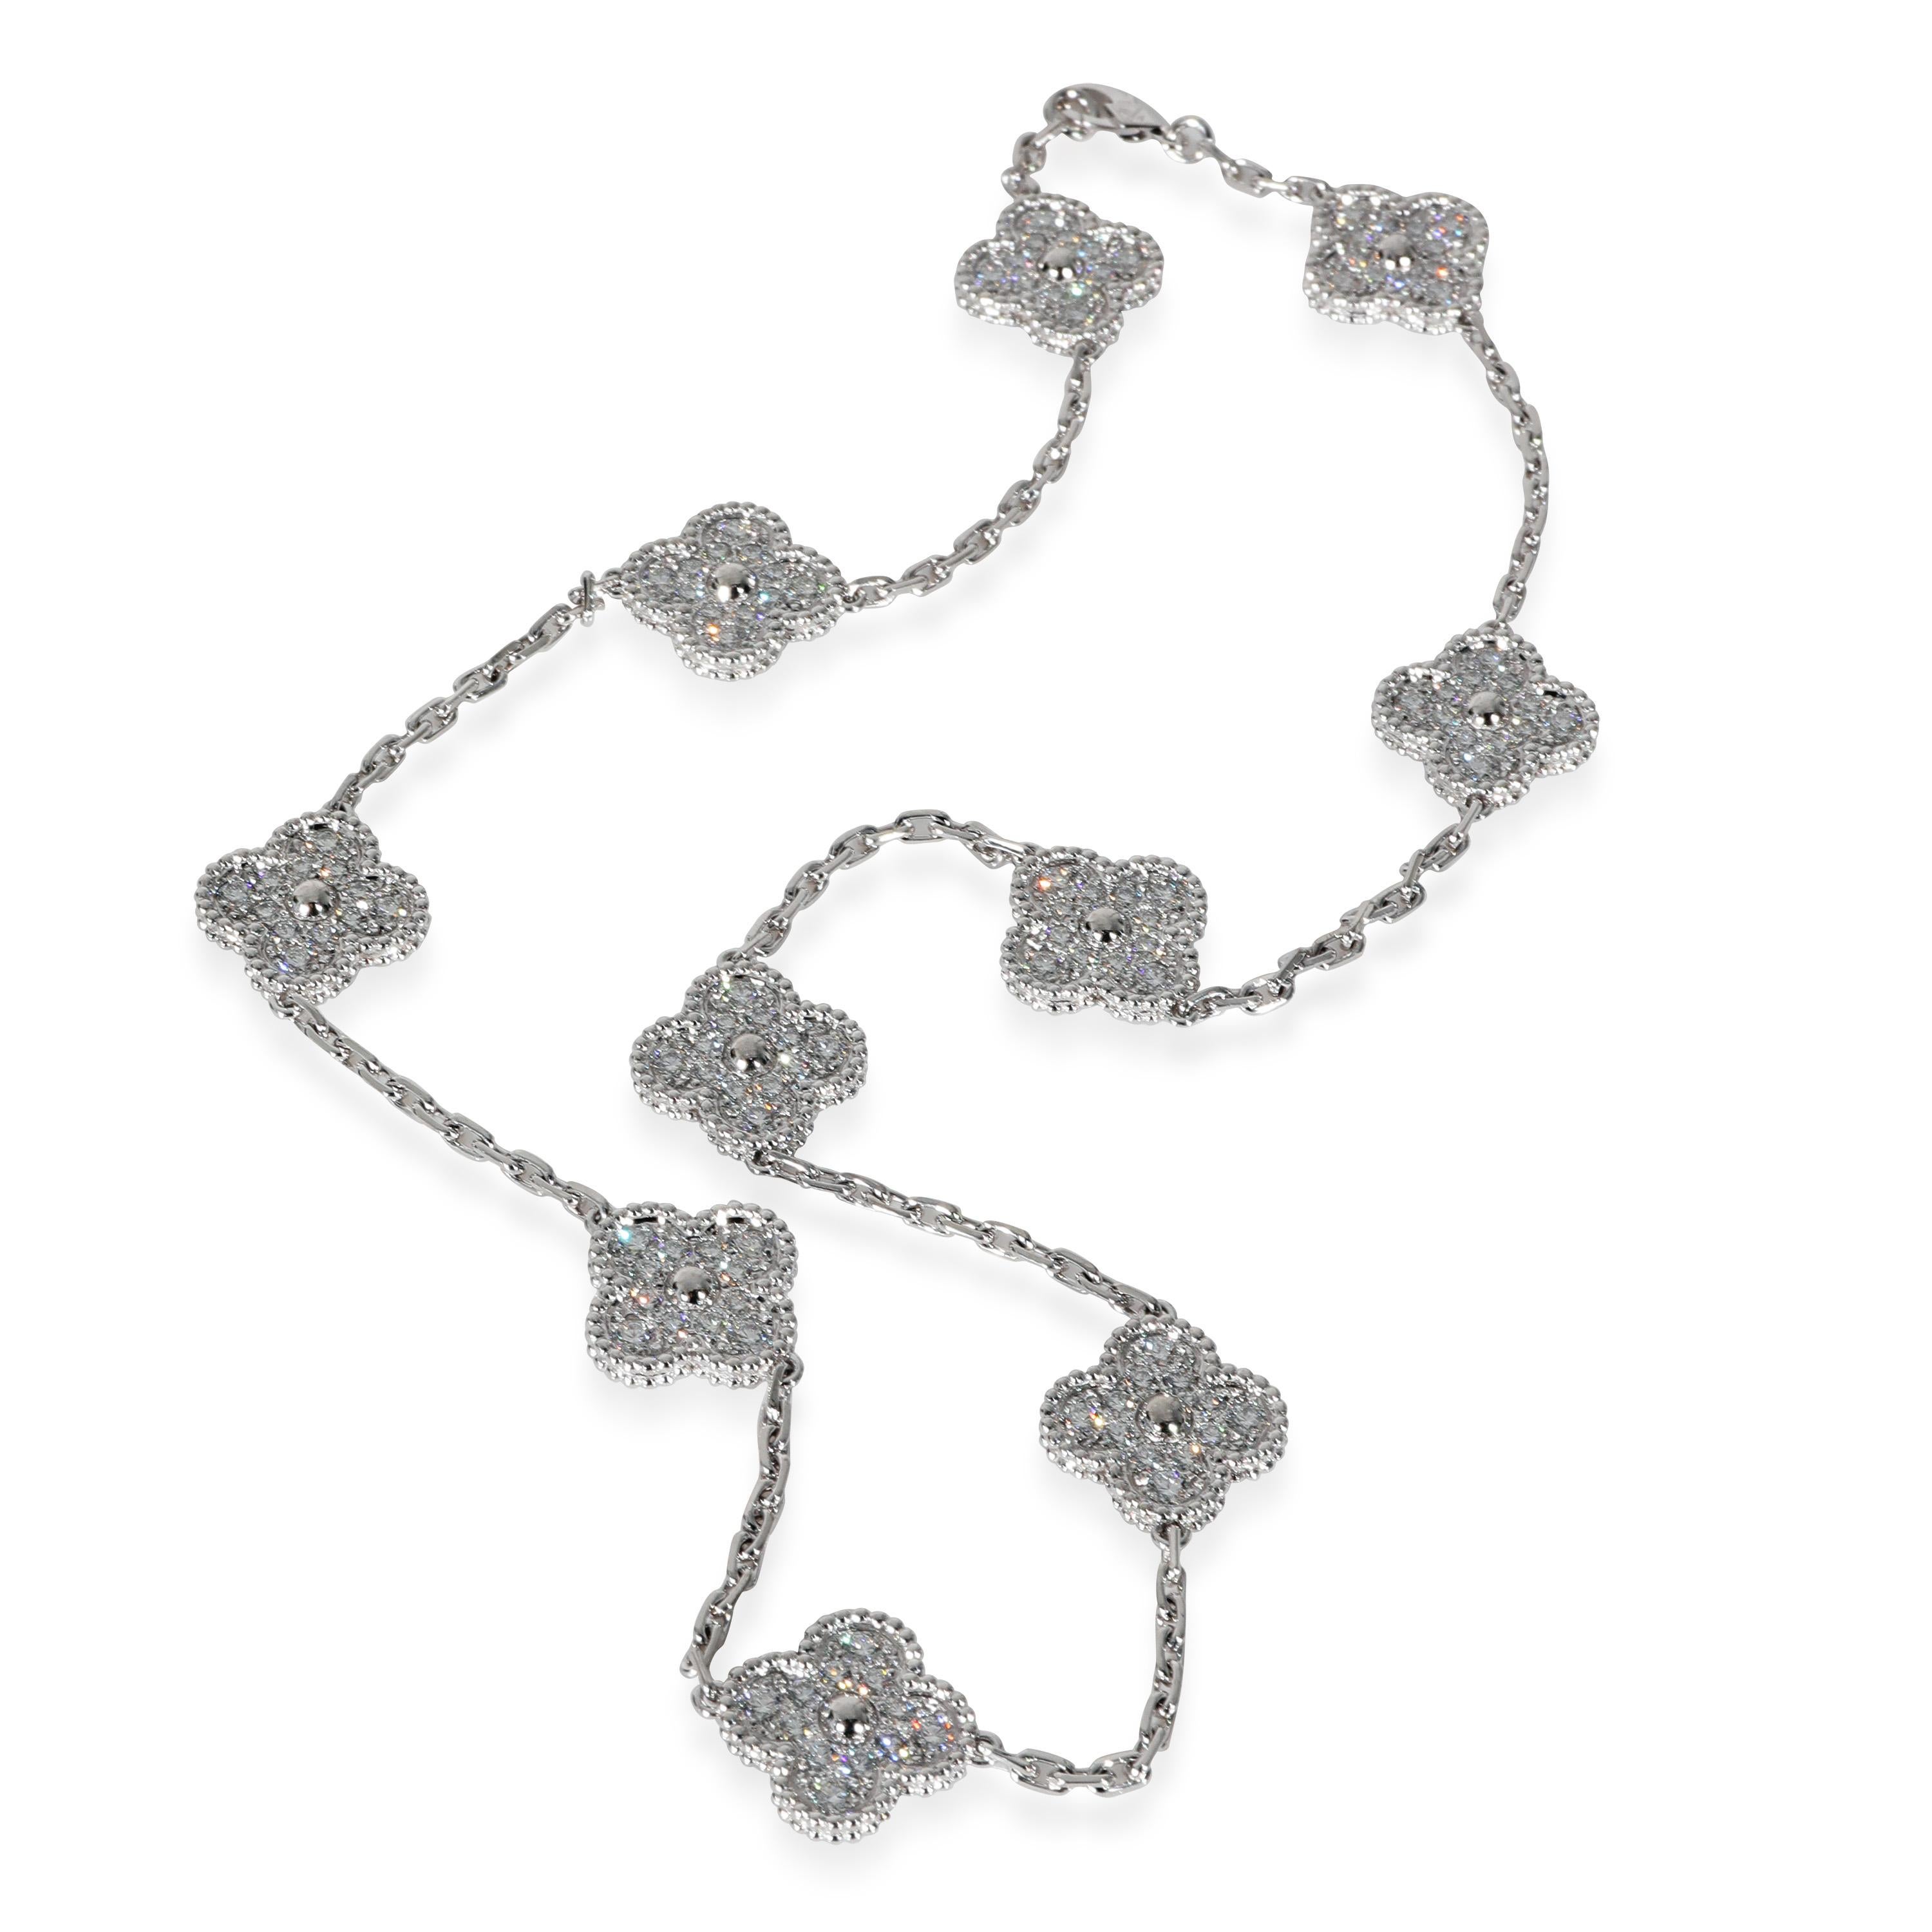 Van Cleef & Arpels Vintage Alhambra Diamond Necklace in 18k White Gold 4.83 CTW

PRIMARY DETAILS
SKU: 130034
Listing Title: Van Cleef & Arpels Vintage Alhambra Diamond Necklace in 18k White Gold 4.83 CTW
Condition Description: Launched in 1968, the